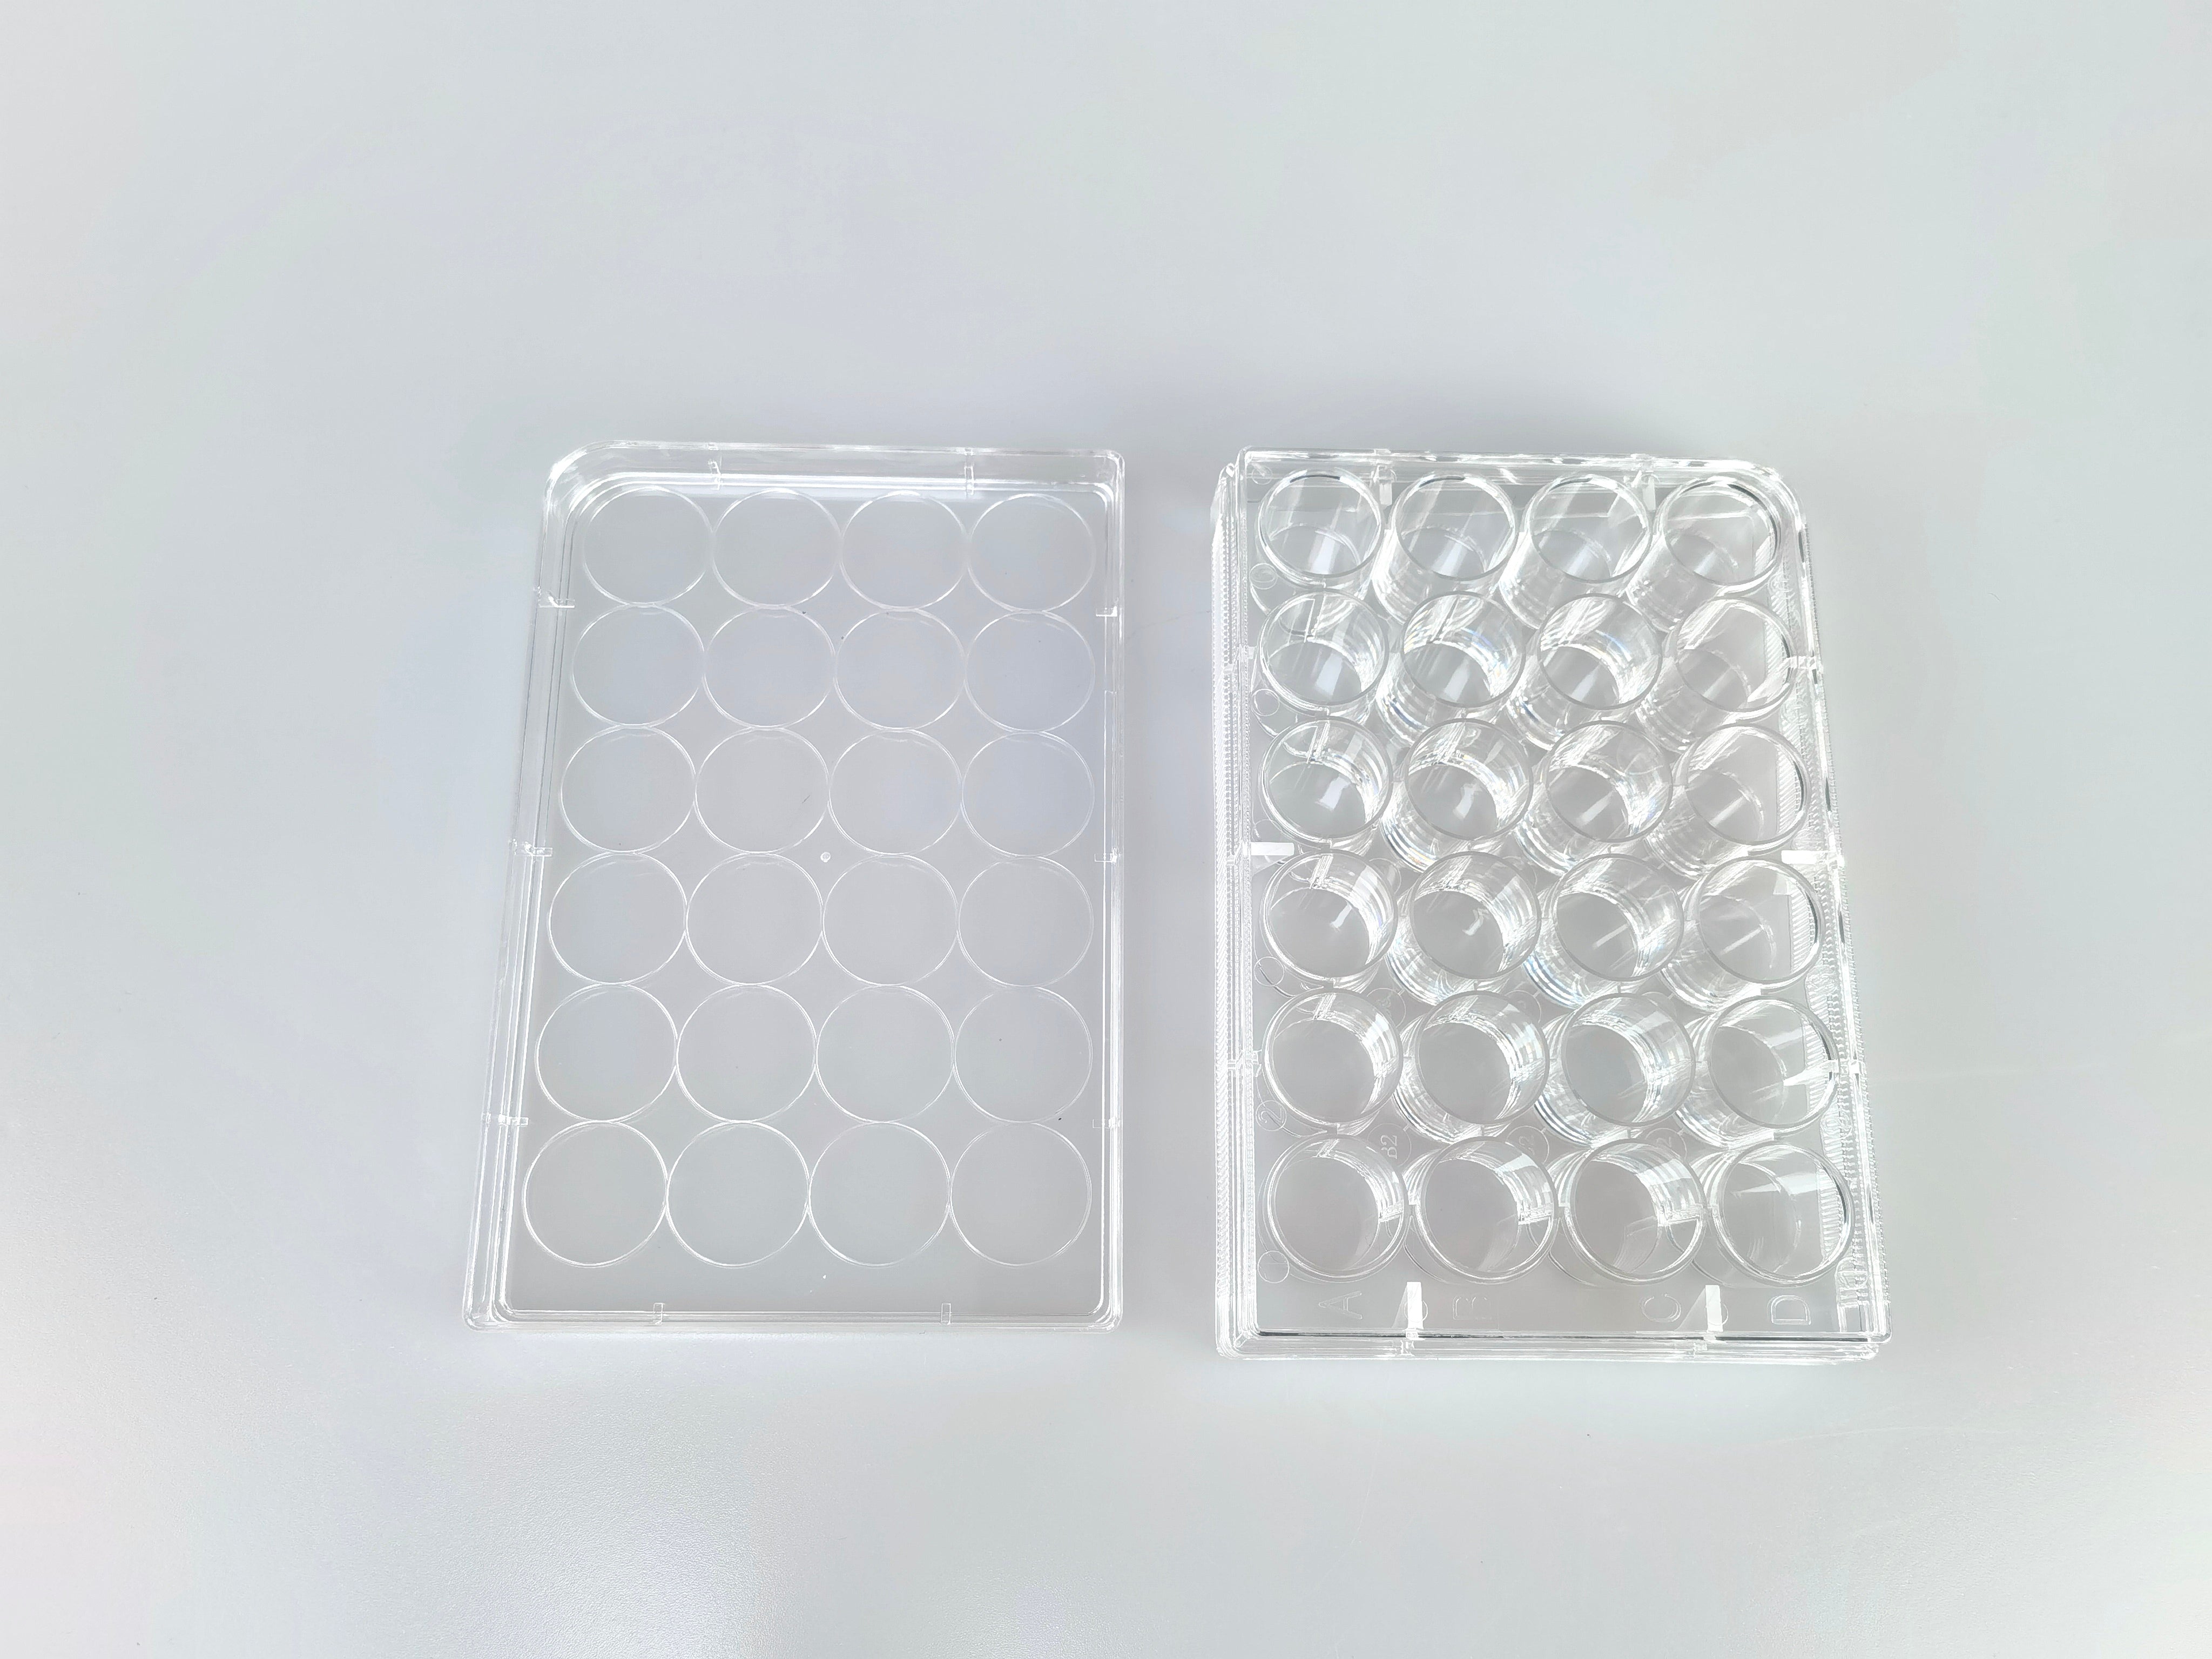 24 Well Cell Culture Plate